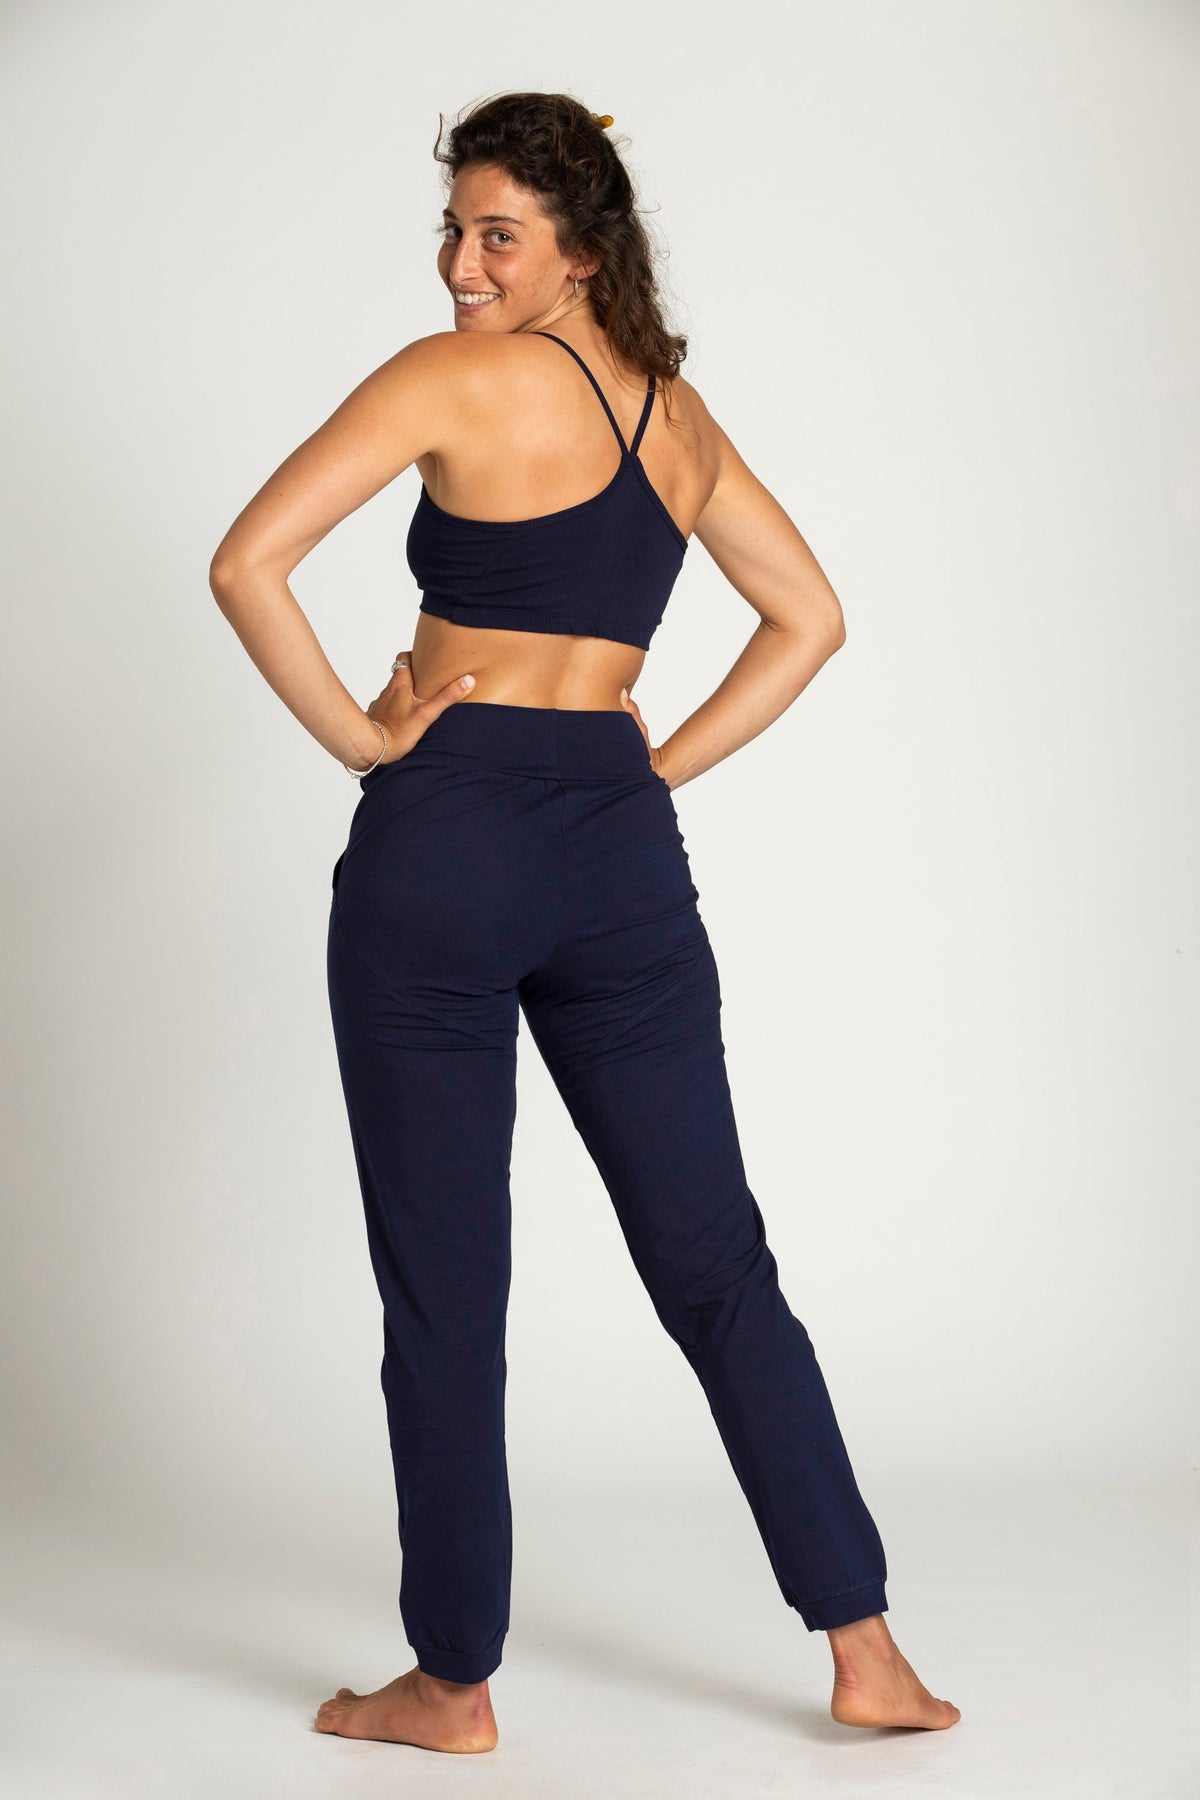 I’mPerfect Organic Cotton Unisex Slouchy Pants 35%off